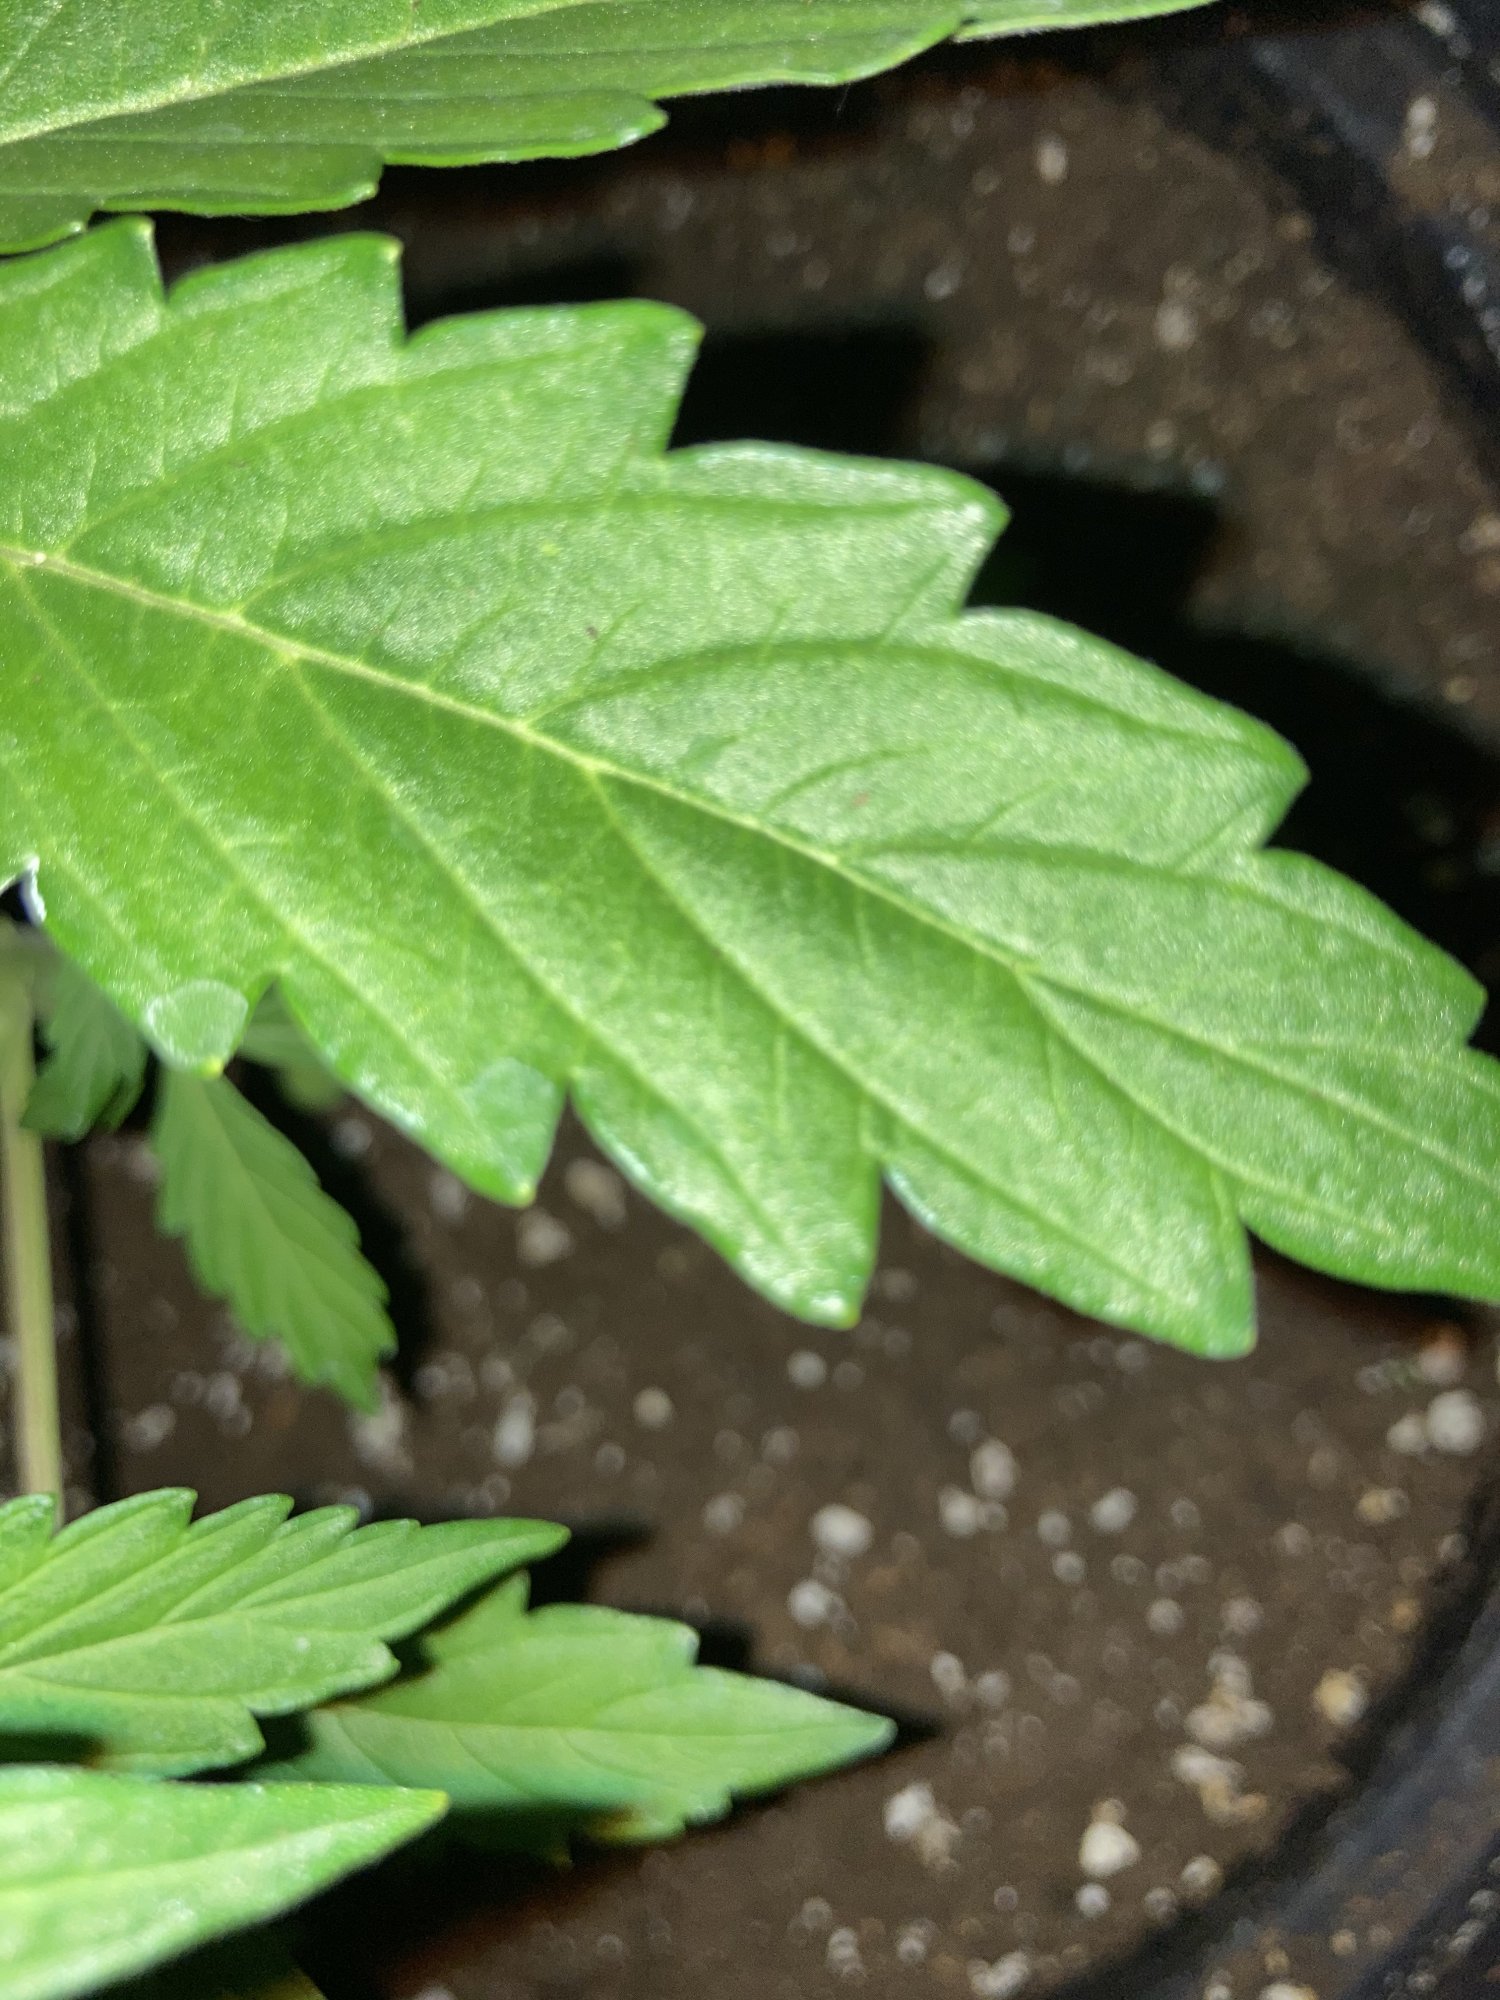 Please help whats this forming on my plant